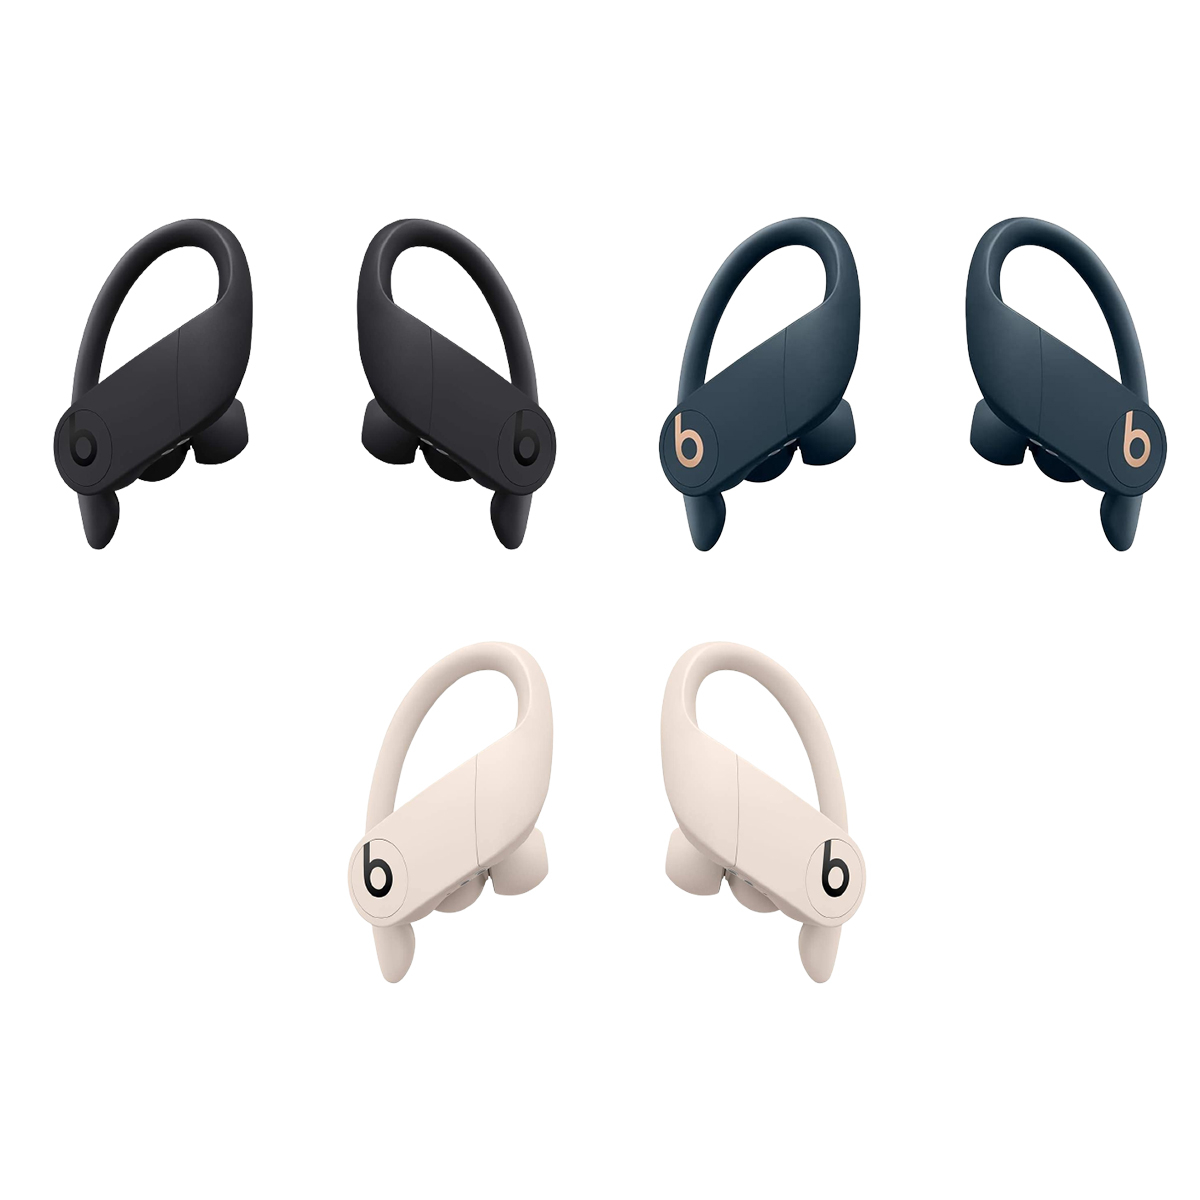 Save $100 on Beats Powerbeats Pro Earbuds With 51,700+ 5-Star Reviews